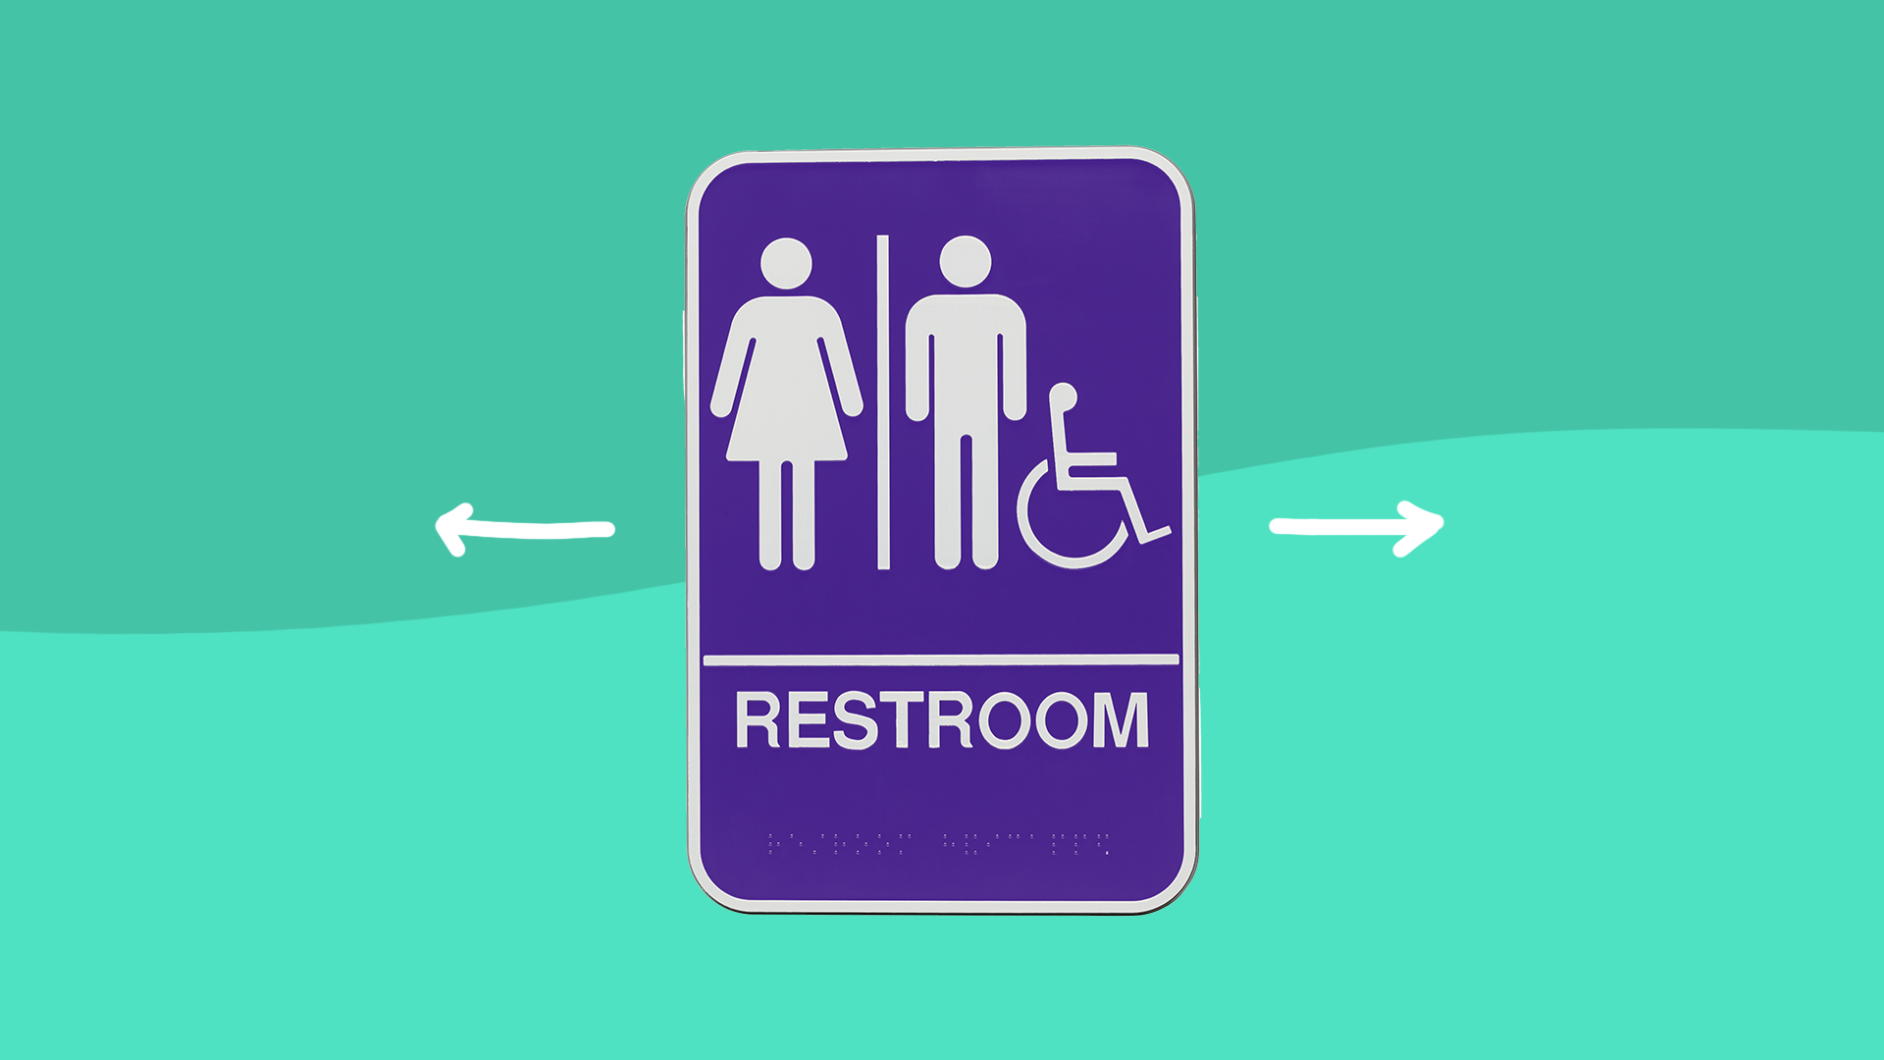 A sign for the restroom for people with recurrent UTIs